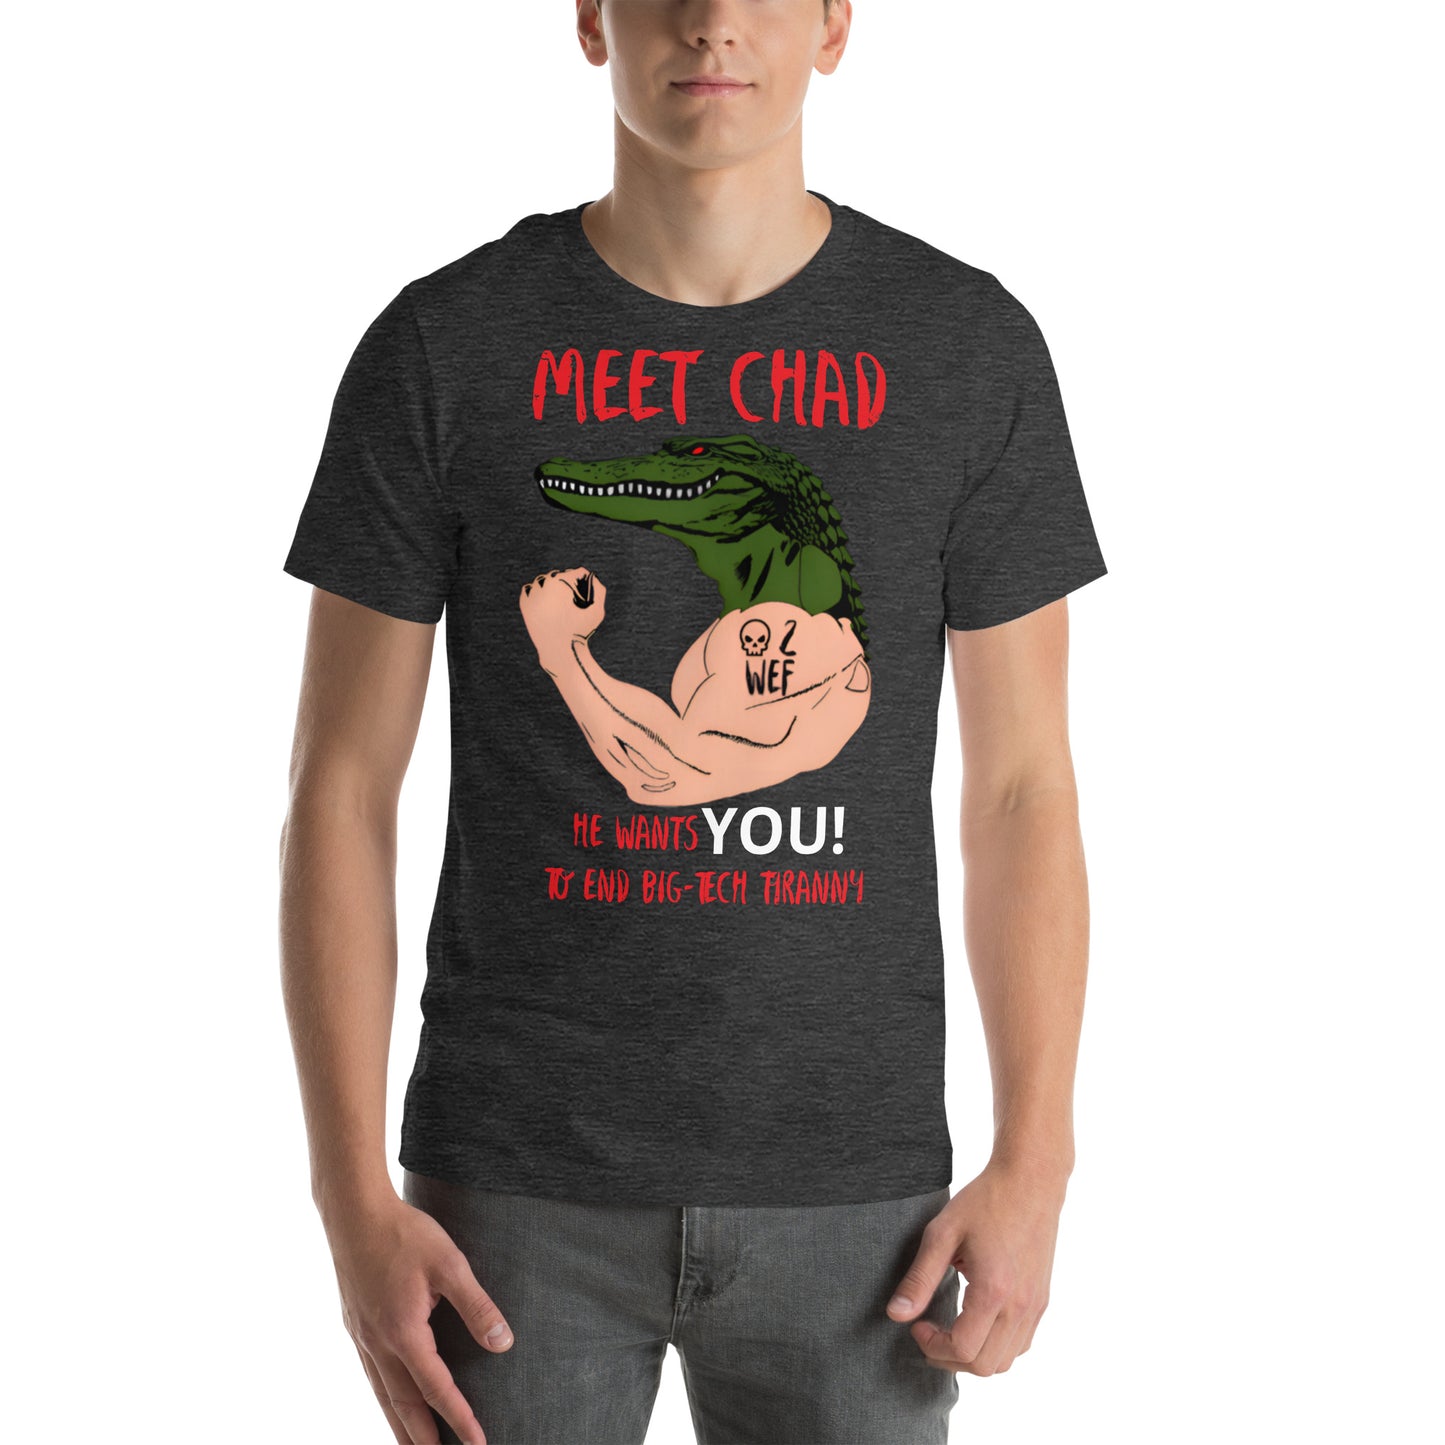 Meet Chad T-Shirt - Premium Material - Deluxe Edition